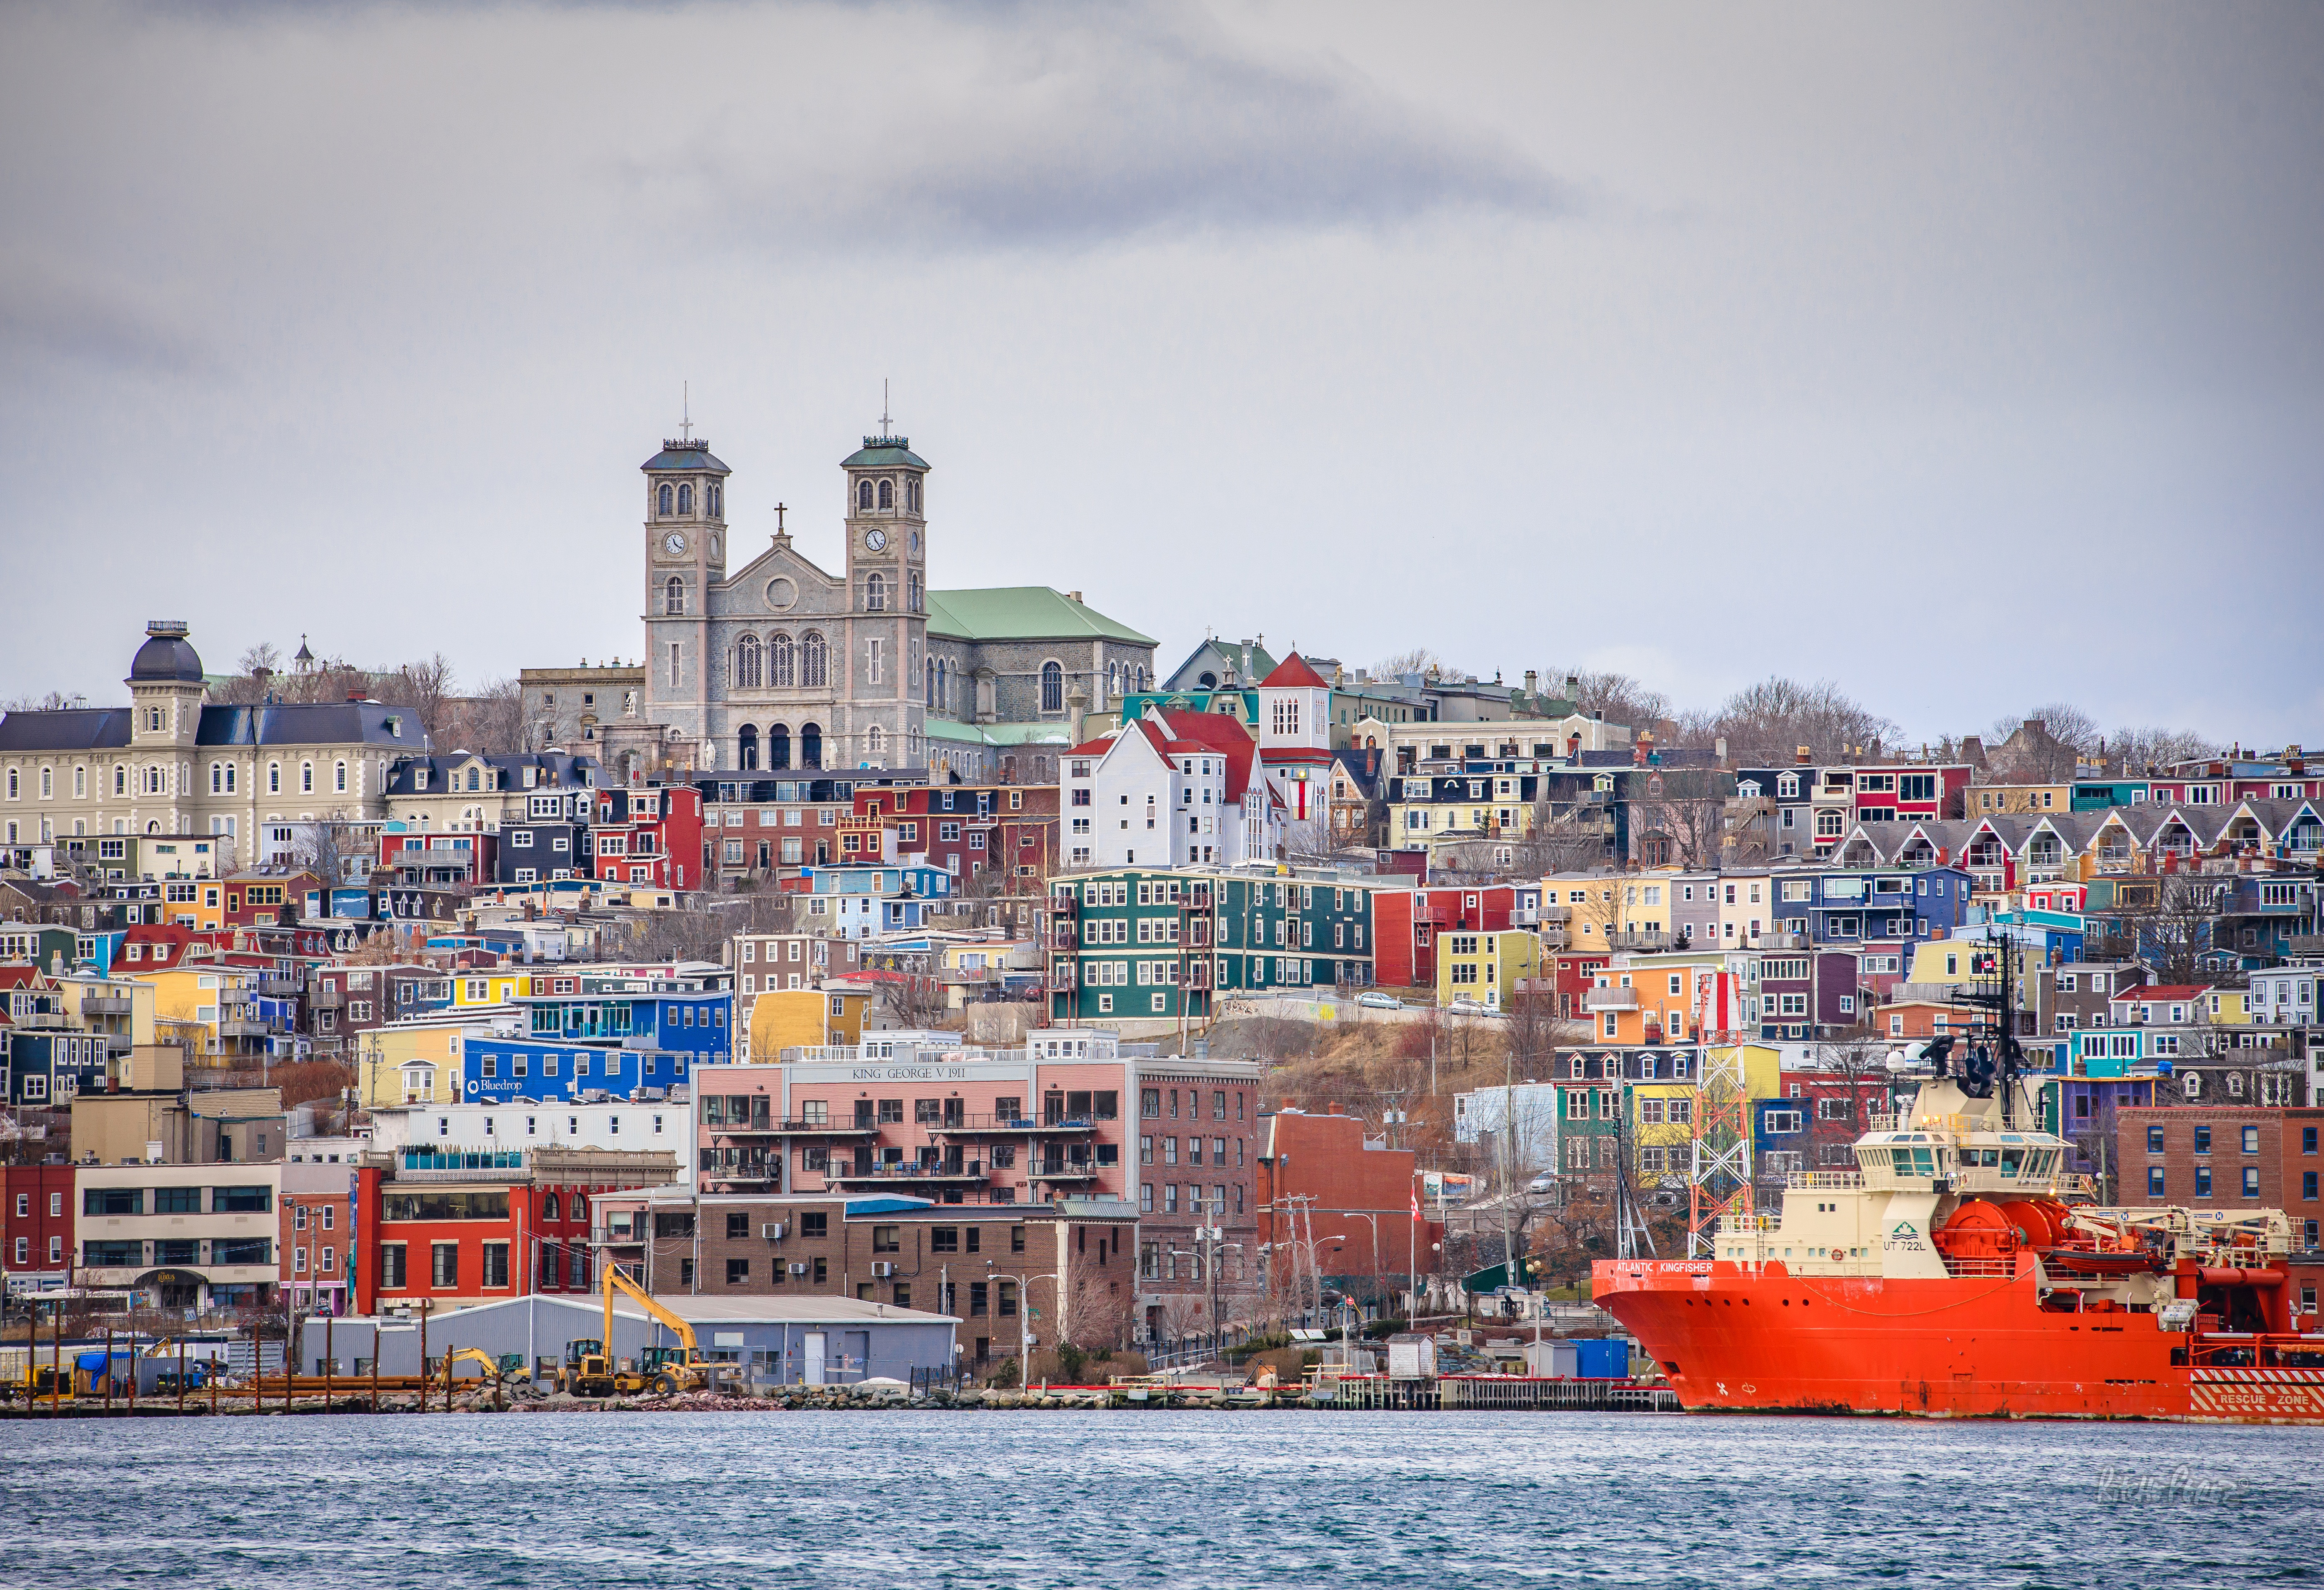 Downtown St Johns In Newfoundland Image Free Stock Photo Public.